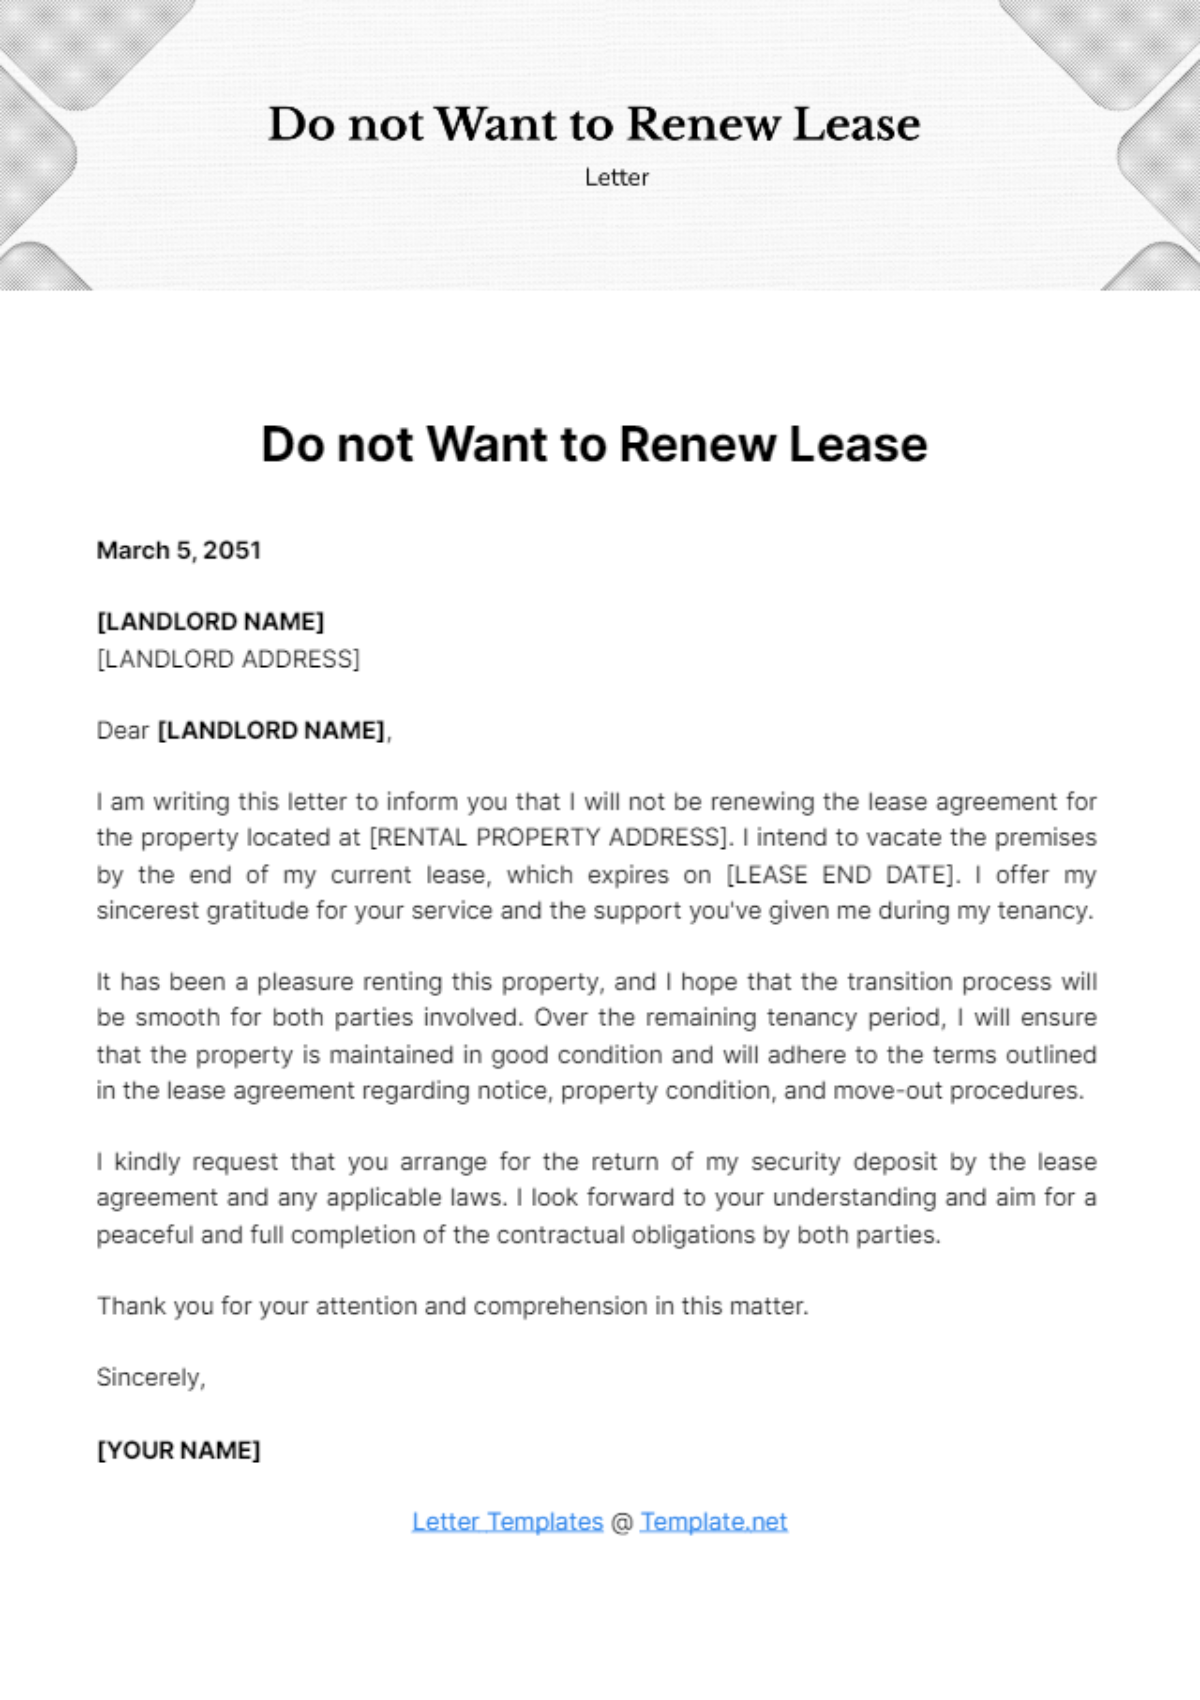 Free Do not Want to Renew Lease Letter Template